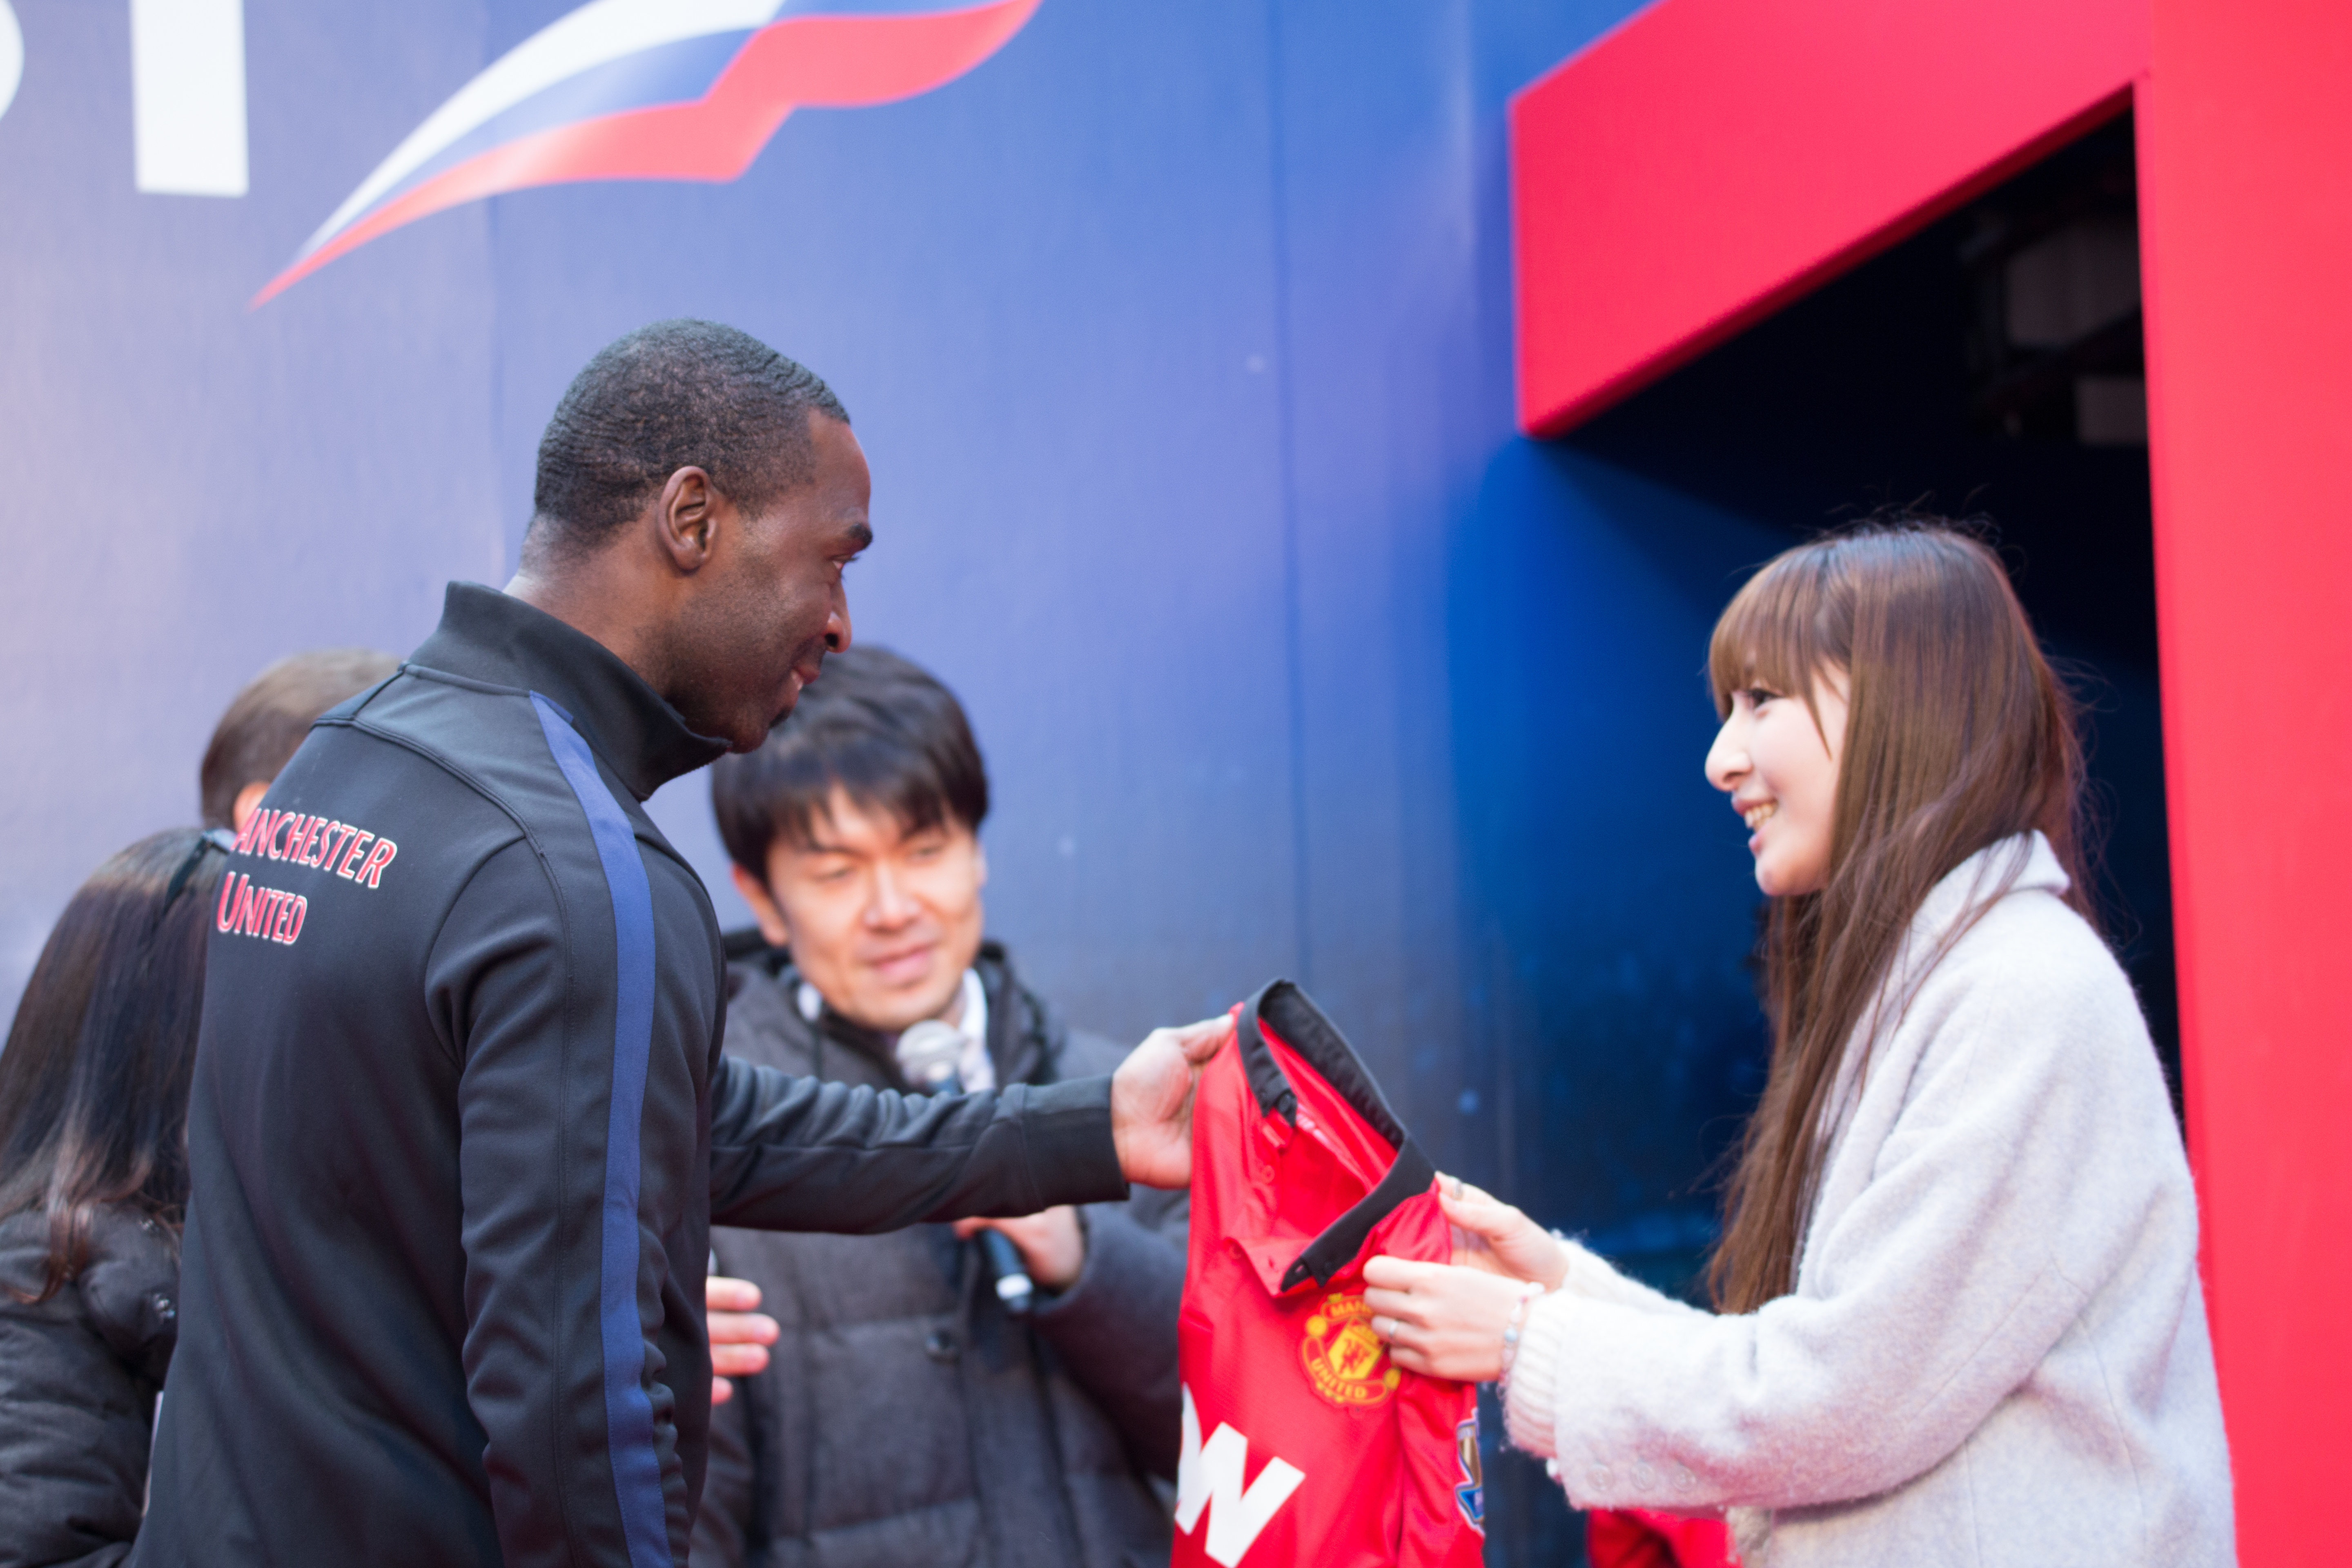 File:Aeroflot Manchester United Trophy Tour in Tokyo (13048608325).jpg - Wikimedia Commons